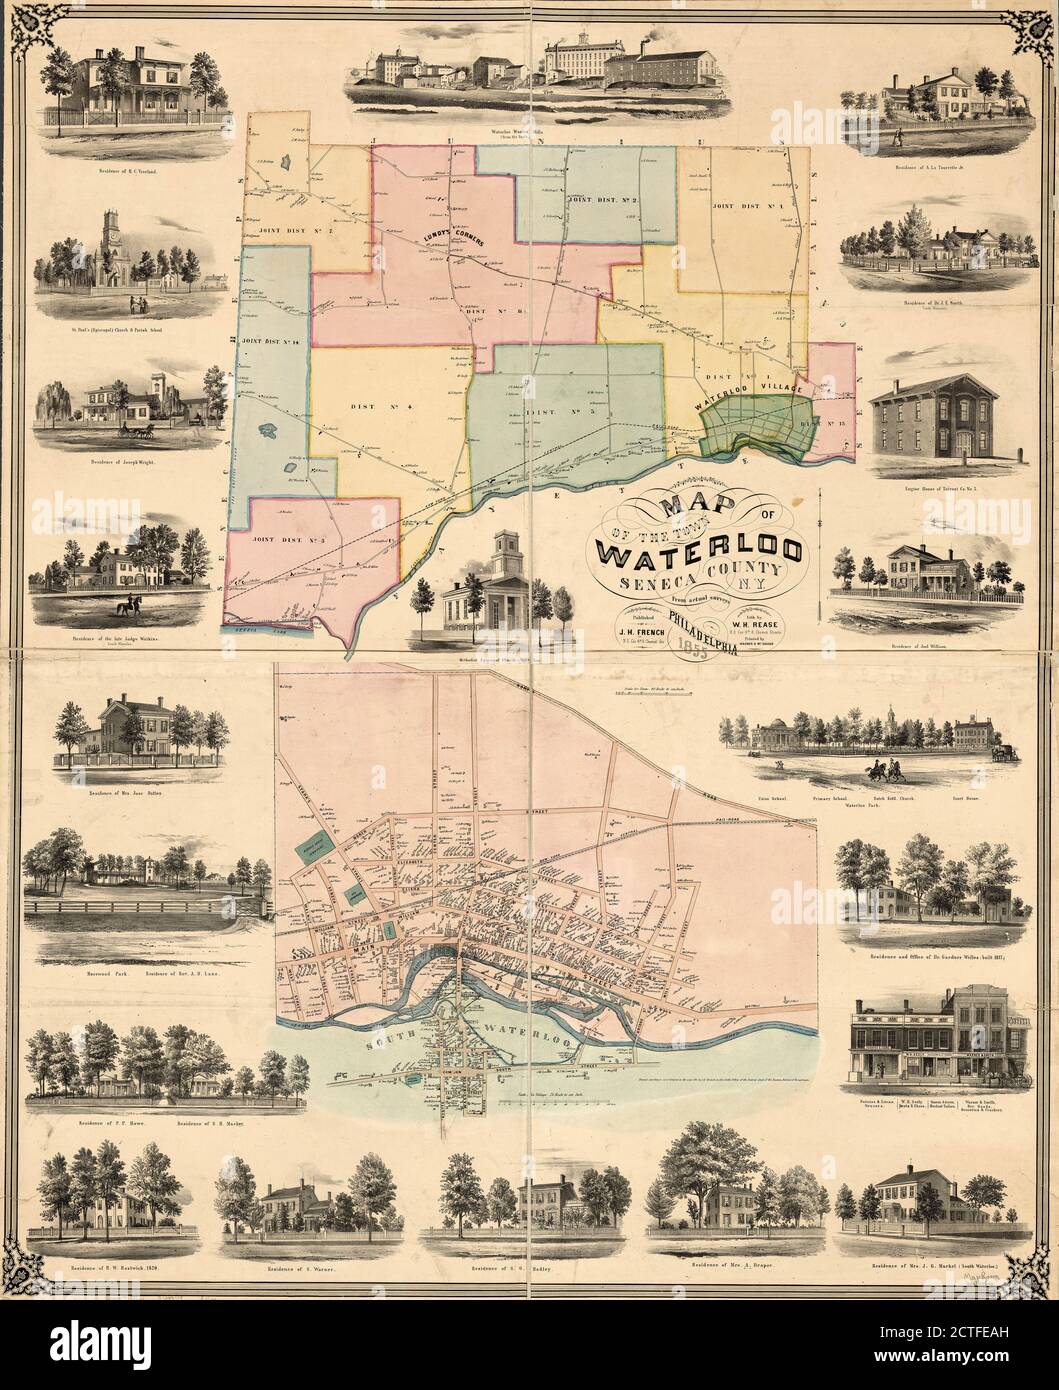 Map of the town of Waterloo, Seneca County, N.Y., cartographic, Maps, 1855, Rease, W. H Stock Photo